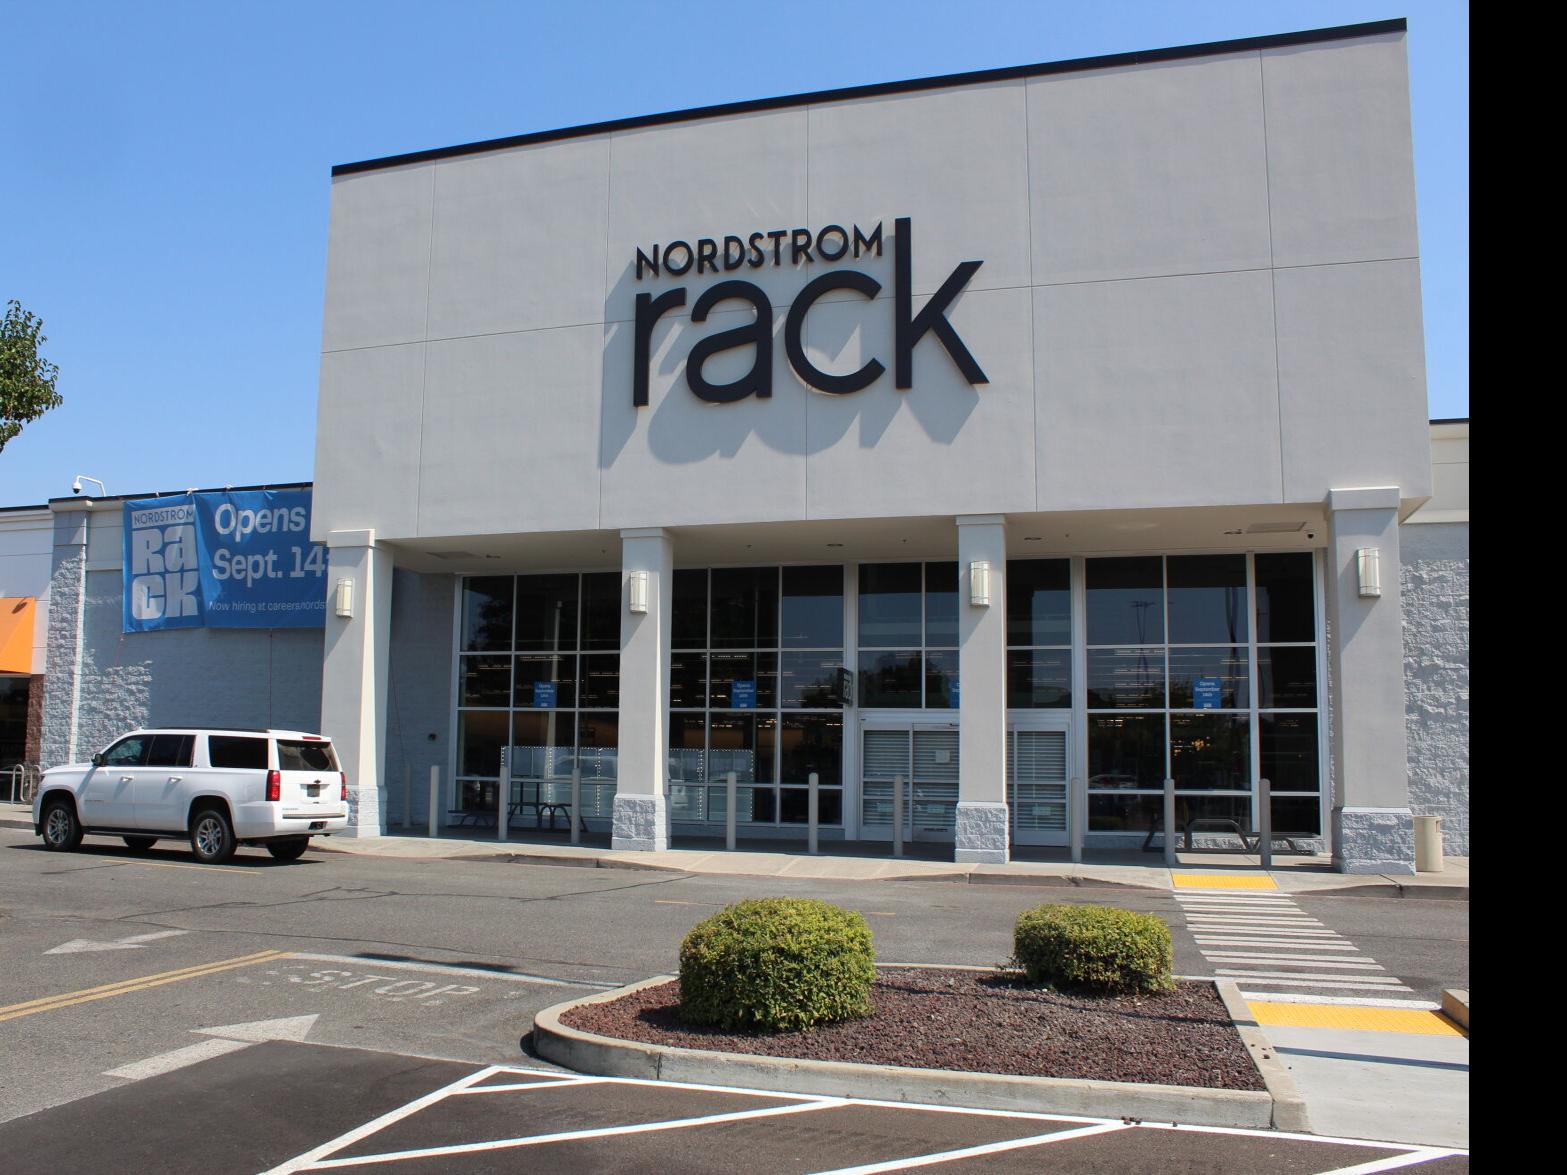 Nordstrom Rack to open store in Yakima Valley in 2023, Business